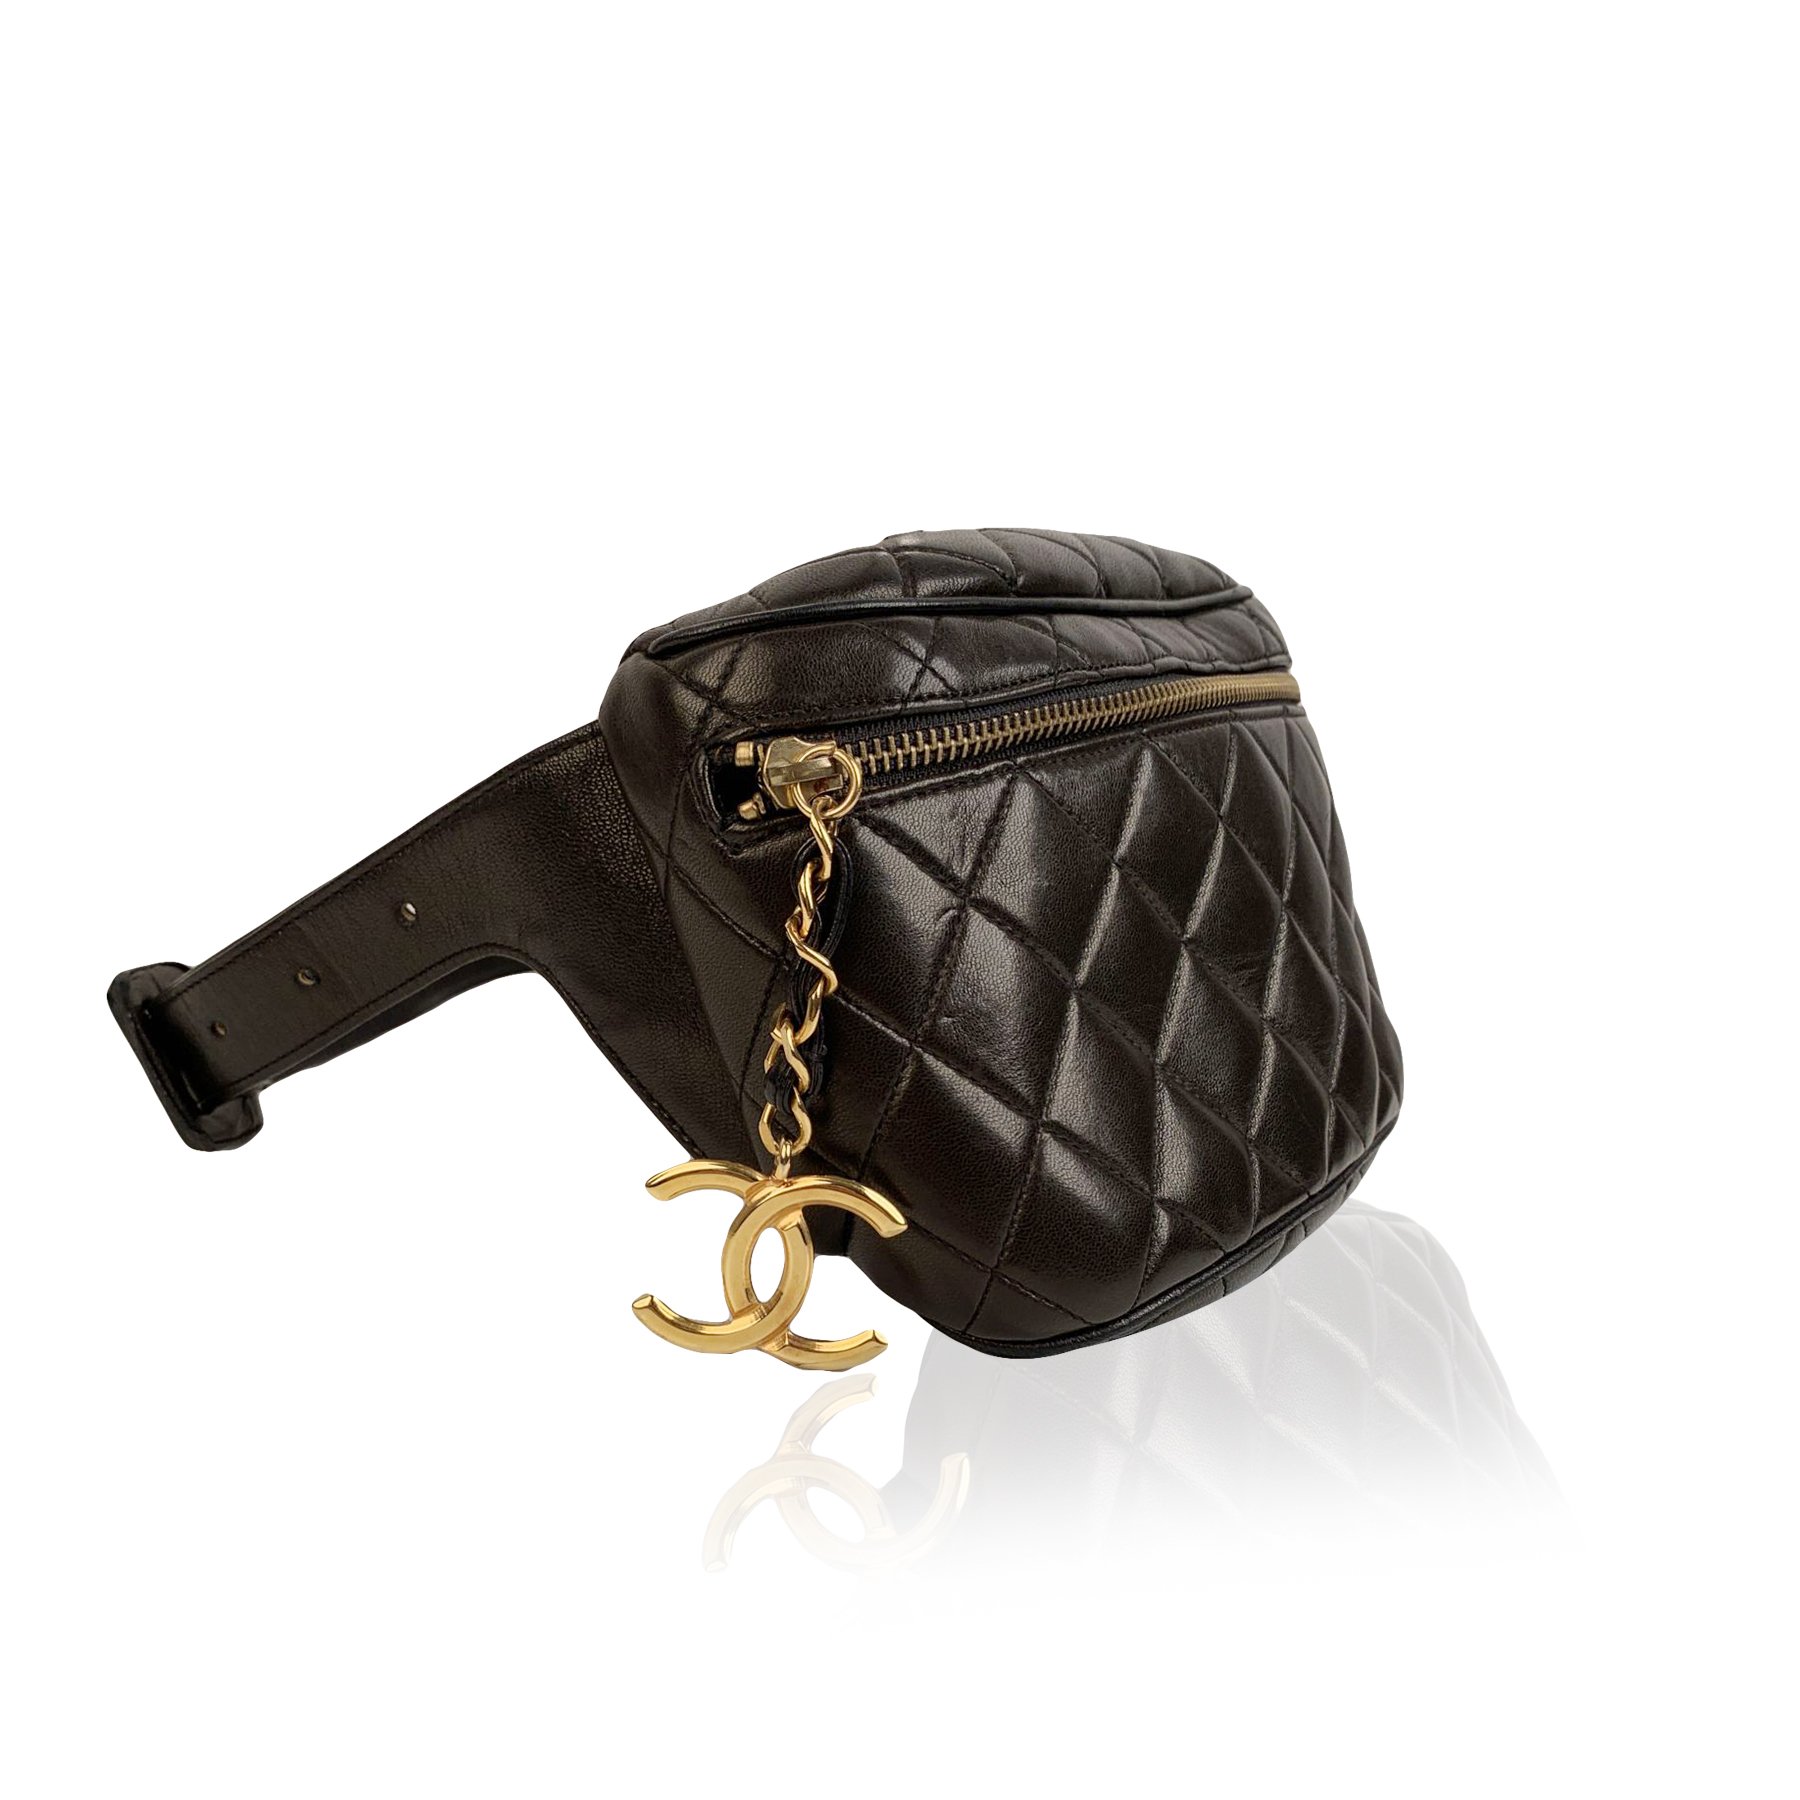 Chanel Vintage Black Quilted Waist Bum Bag Pouch - Image 3 of 10